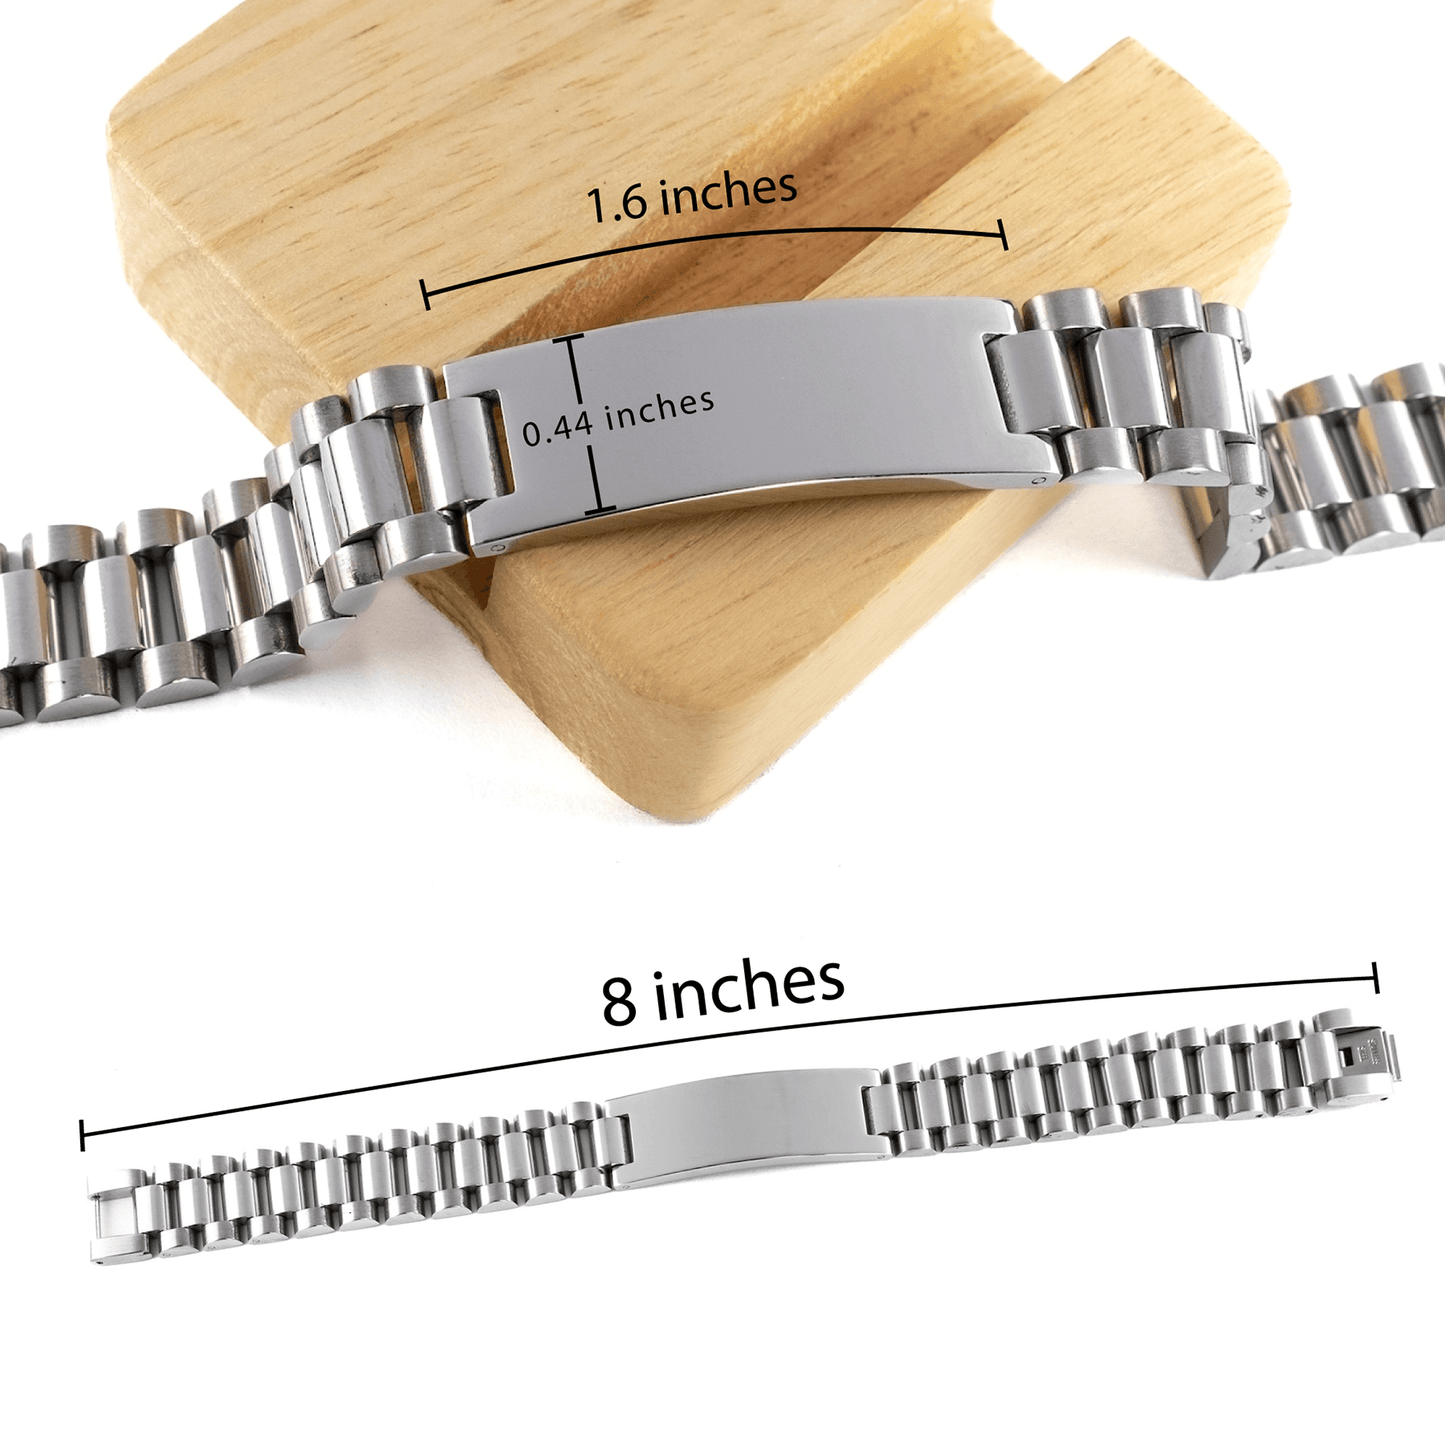 Remarkable Fabricator Gifts, Your dedication and hard work, Inspirational Birthday Christmas Unique Ladder Stainless Steel Bracelet For Fabricator, Coworkers, Men, Women, Friends - Mallard Moon Gift Shop